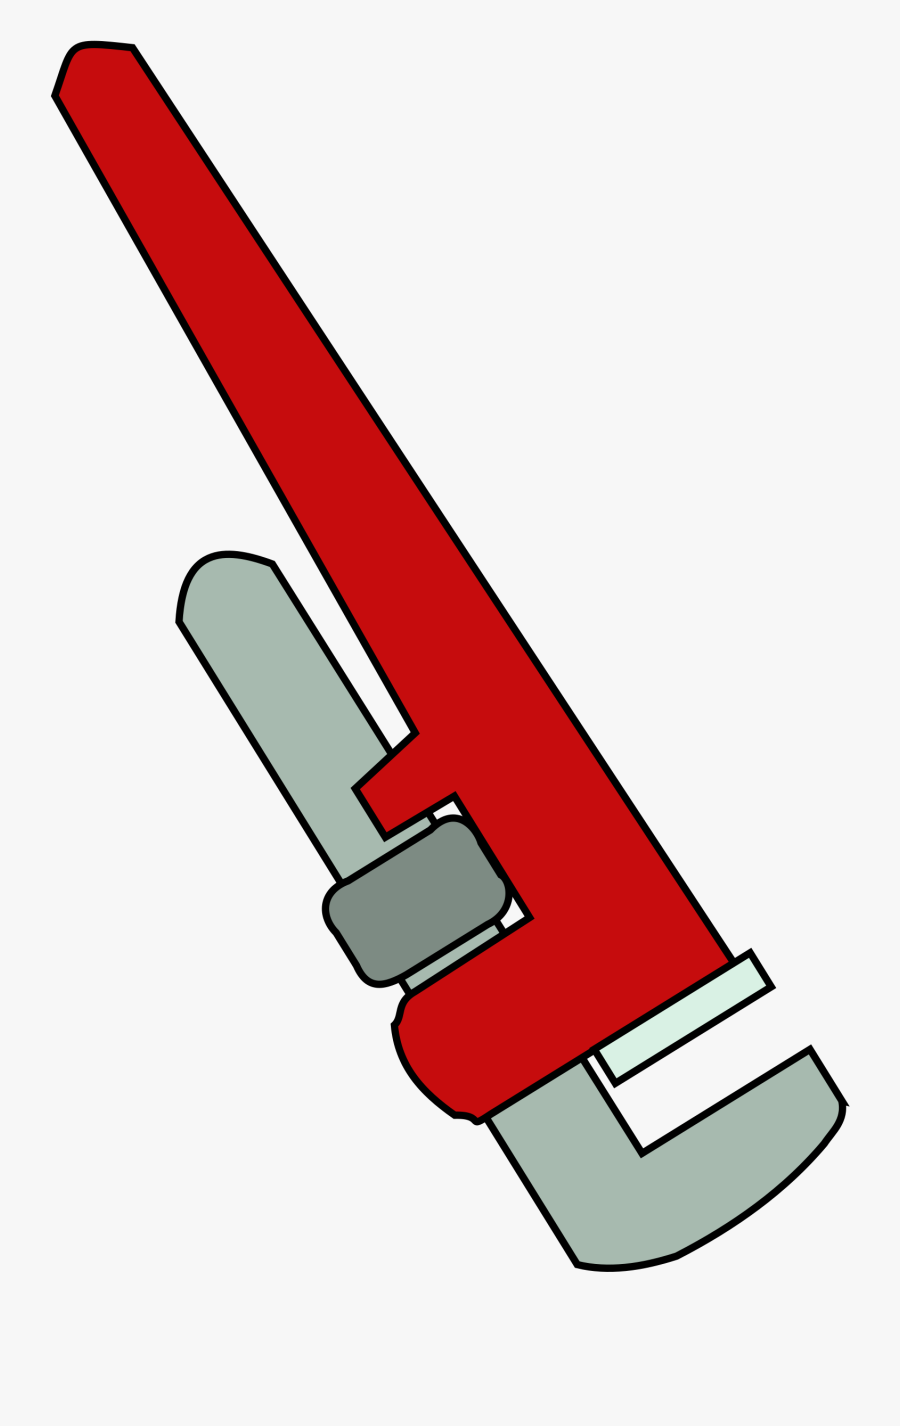 Pipe Wrench Clip Art, Transparent Clipart